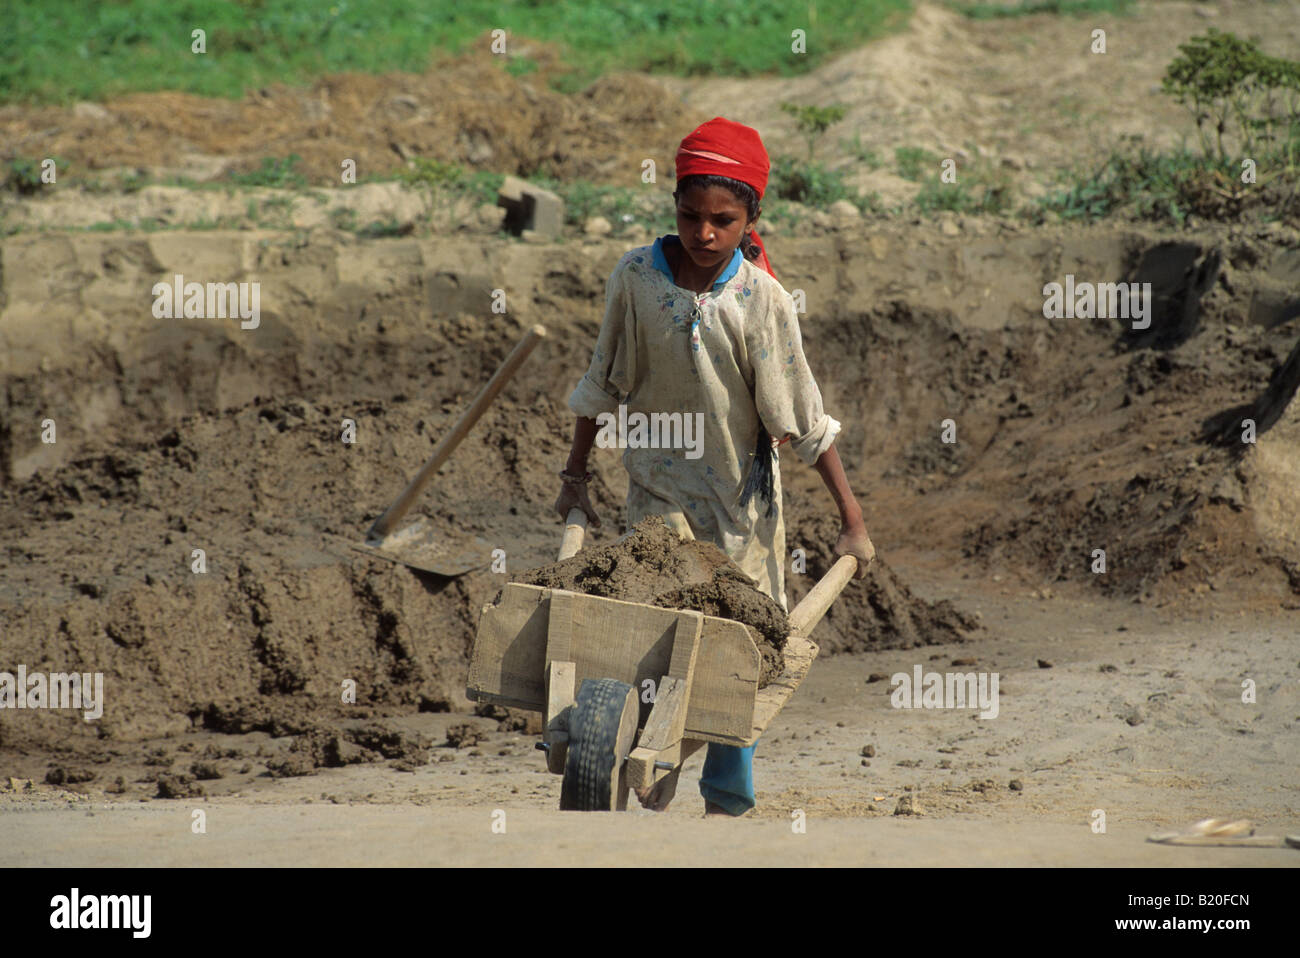 A young girl working as a child laborer in a brick kiln factory moves a wheelbarrow of dirt in Punjab Pakistan Stock Photo